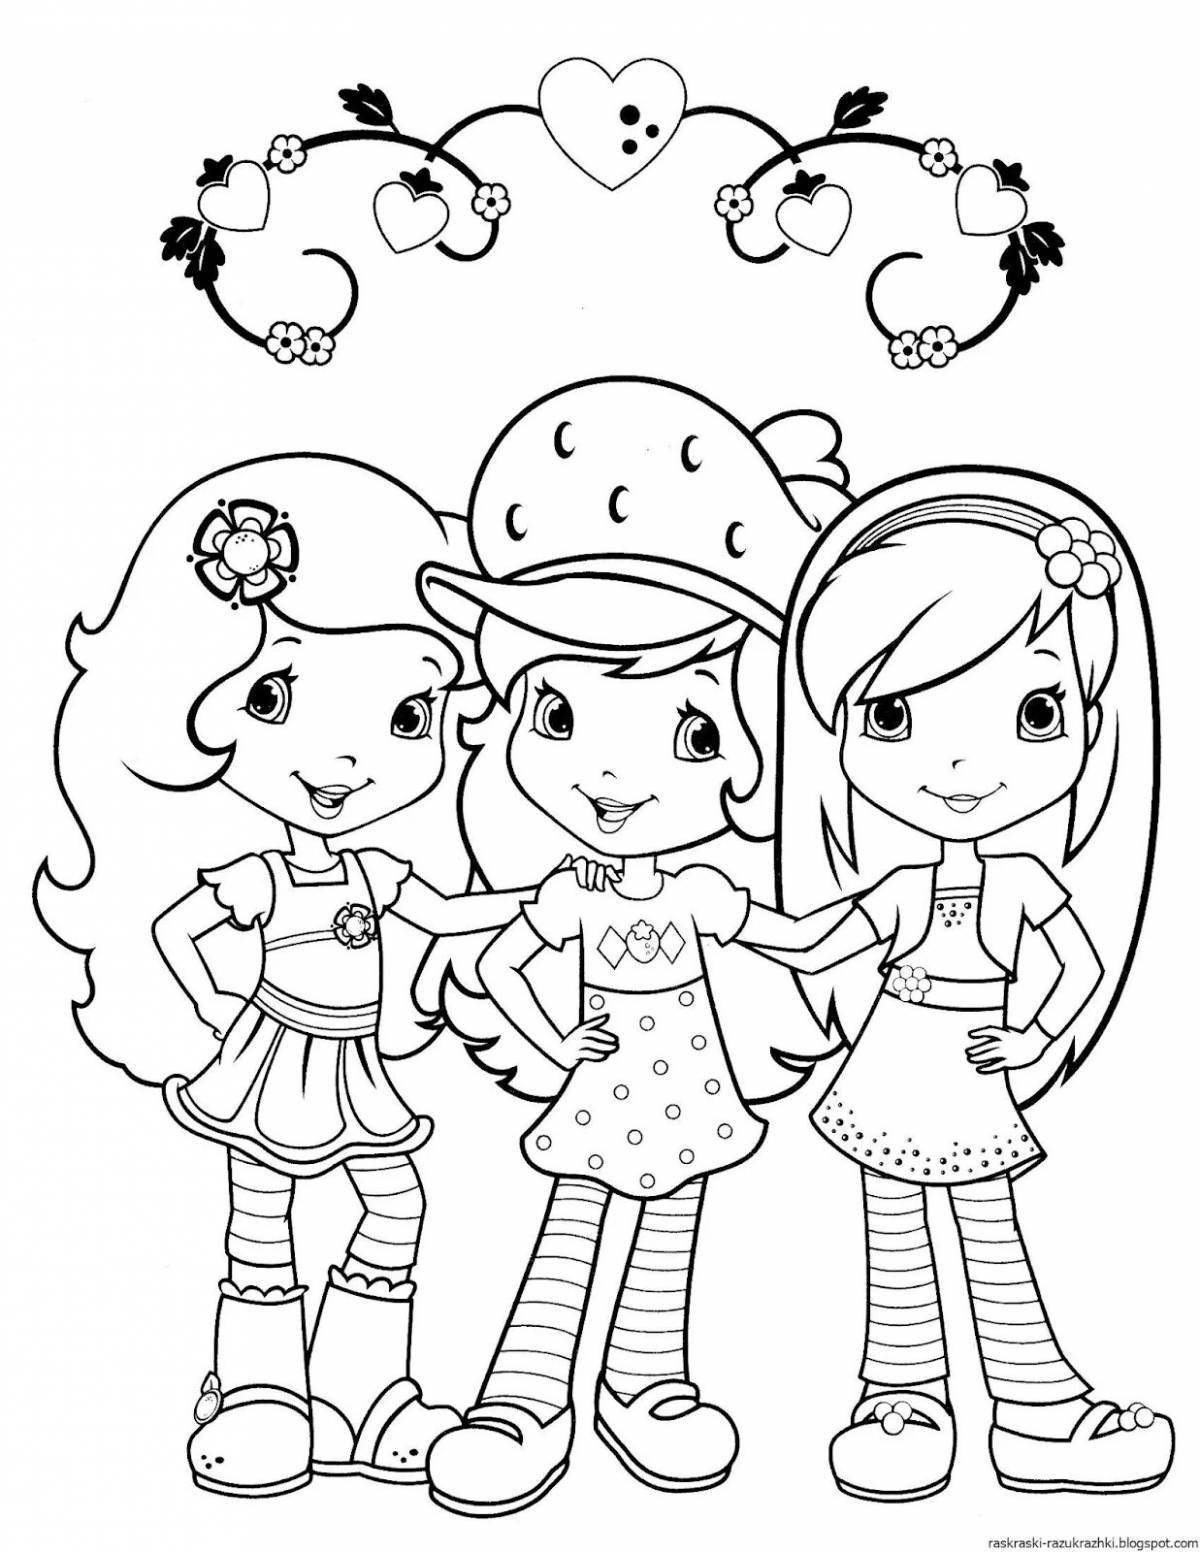 Colourful coloring book for older girls